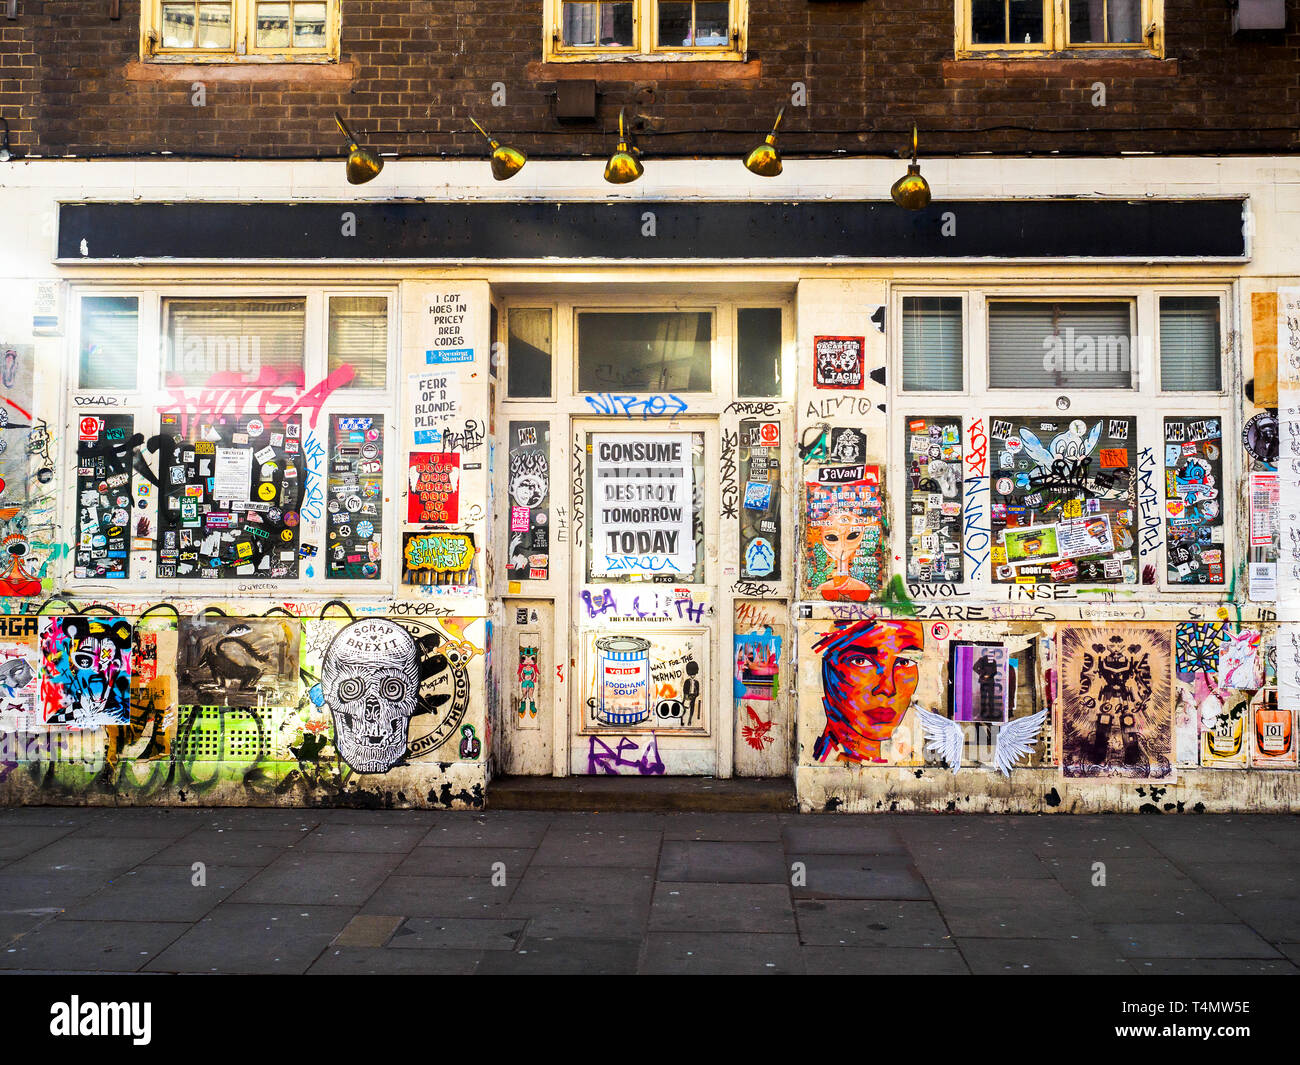 Street art at a building facade in Shoreditch - East London, England Stock Photo